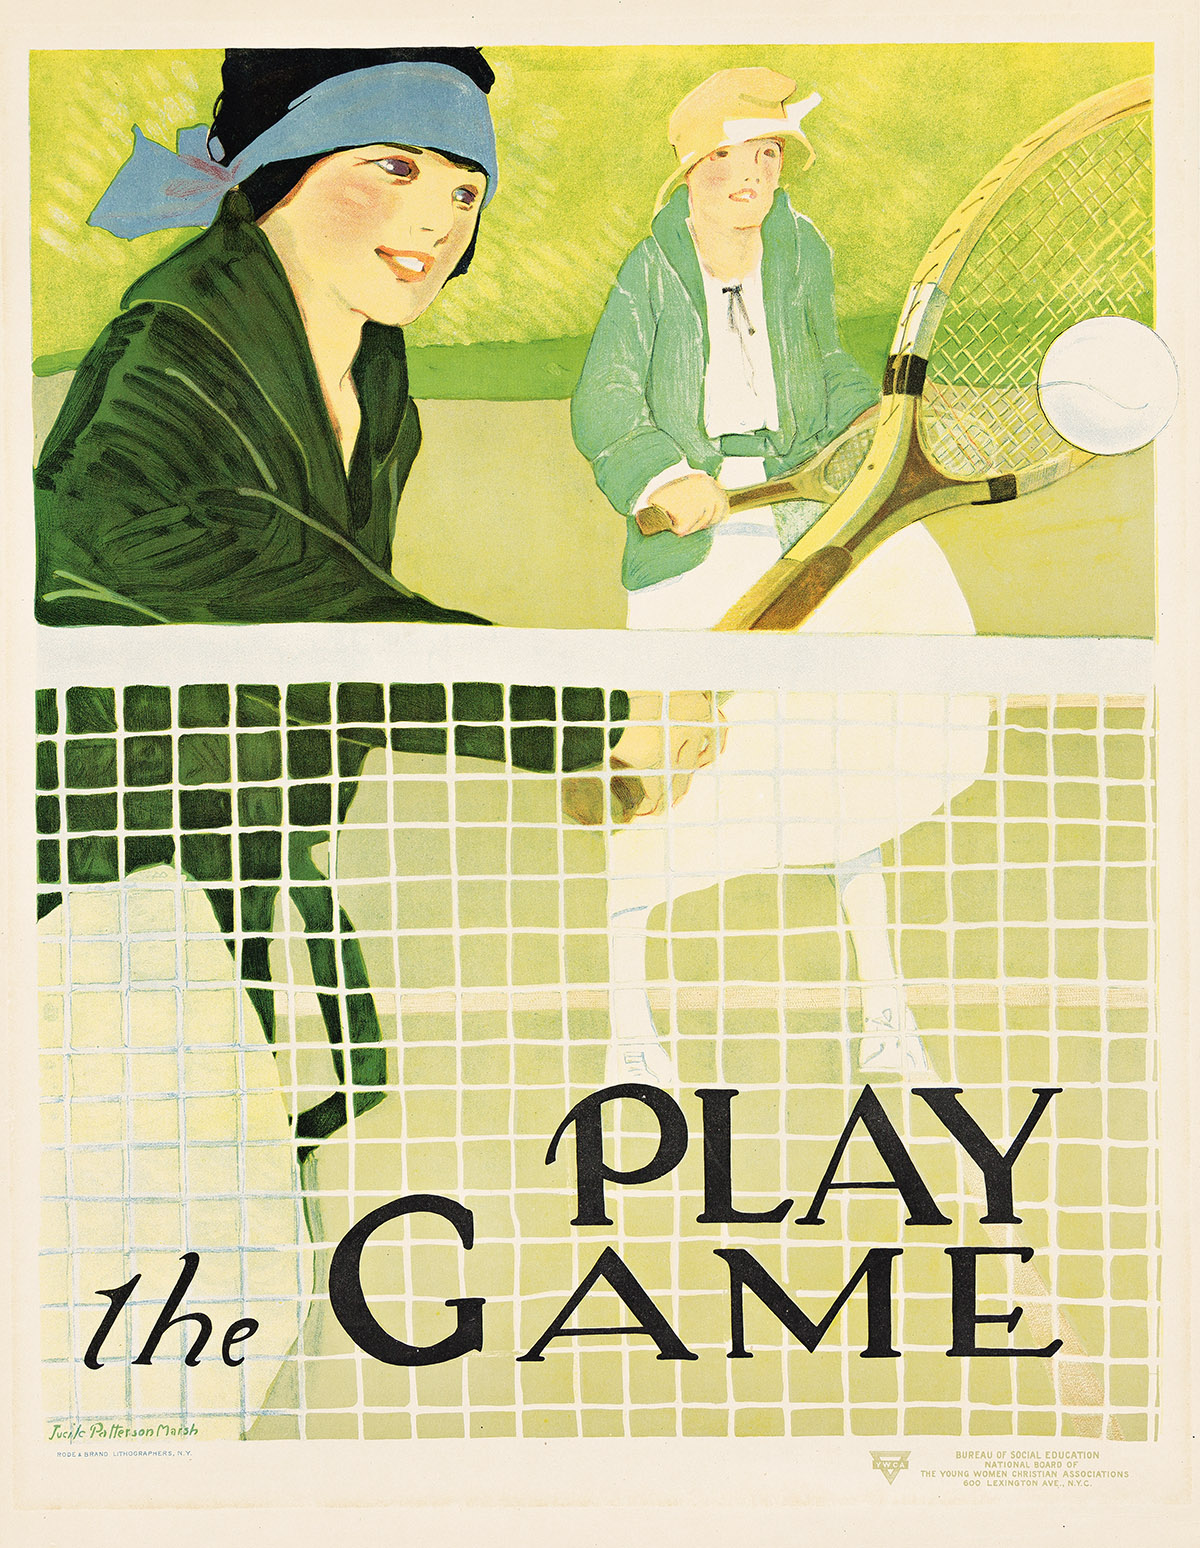 LUCILE PATTERSON MARSH (1890-1978). PLAY THE GAME / YWCA. 1925. 26x20 inches, 66x50¾ cm. Rode & Brand Lithographers, New York.